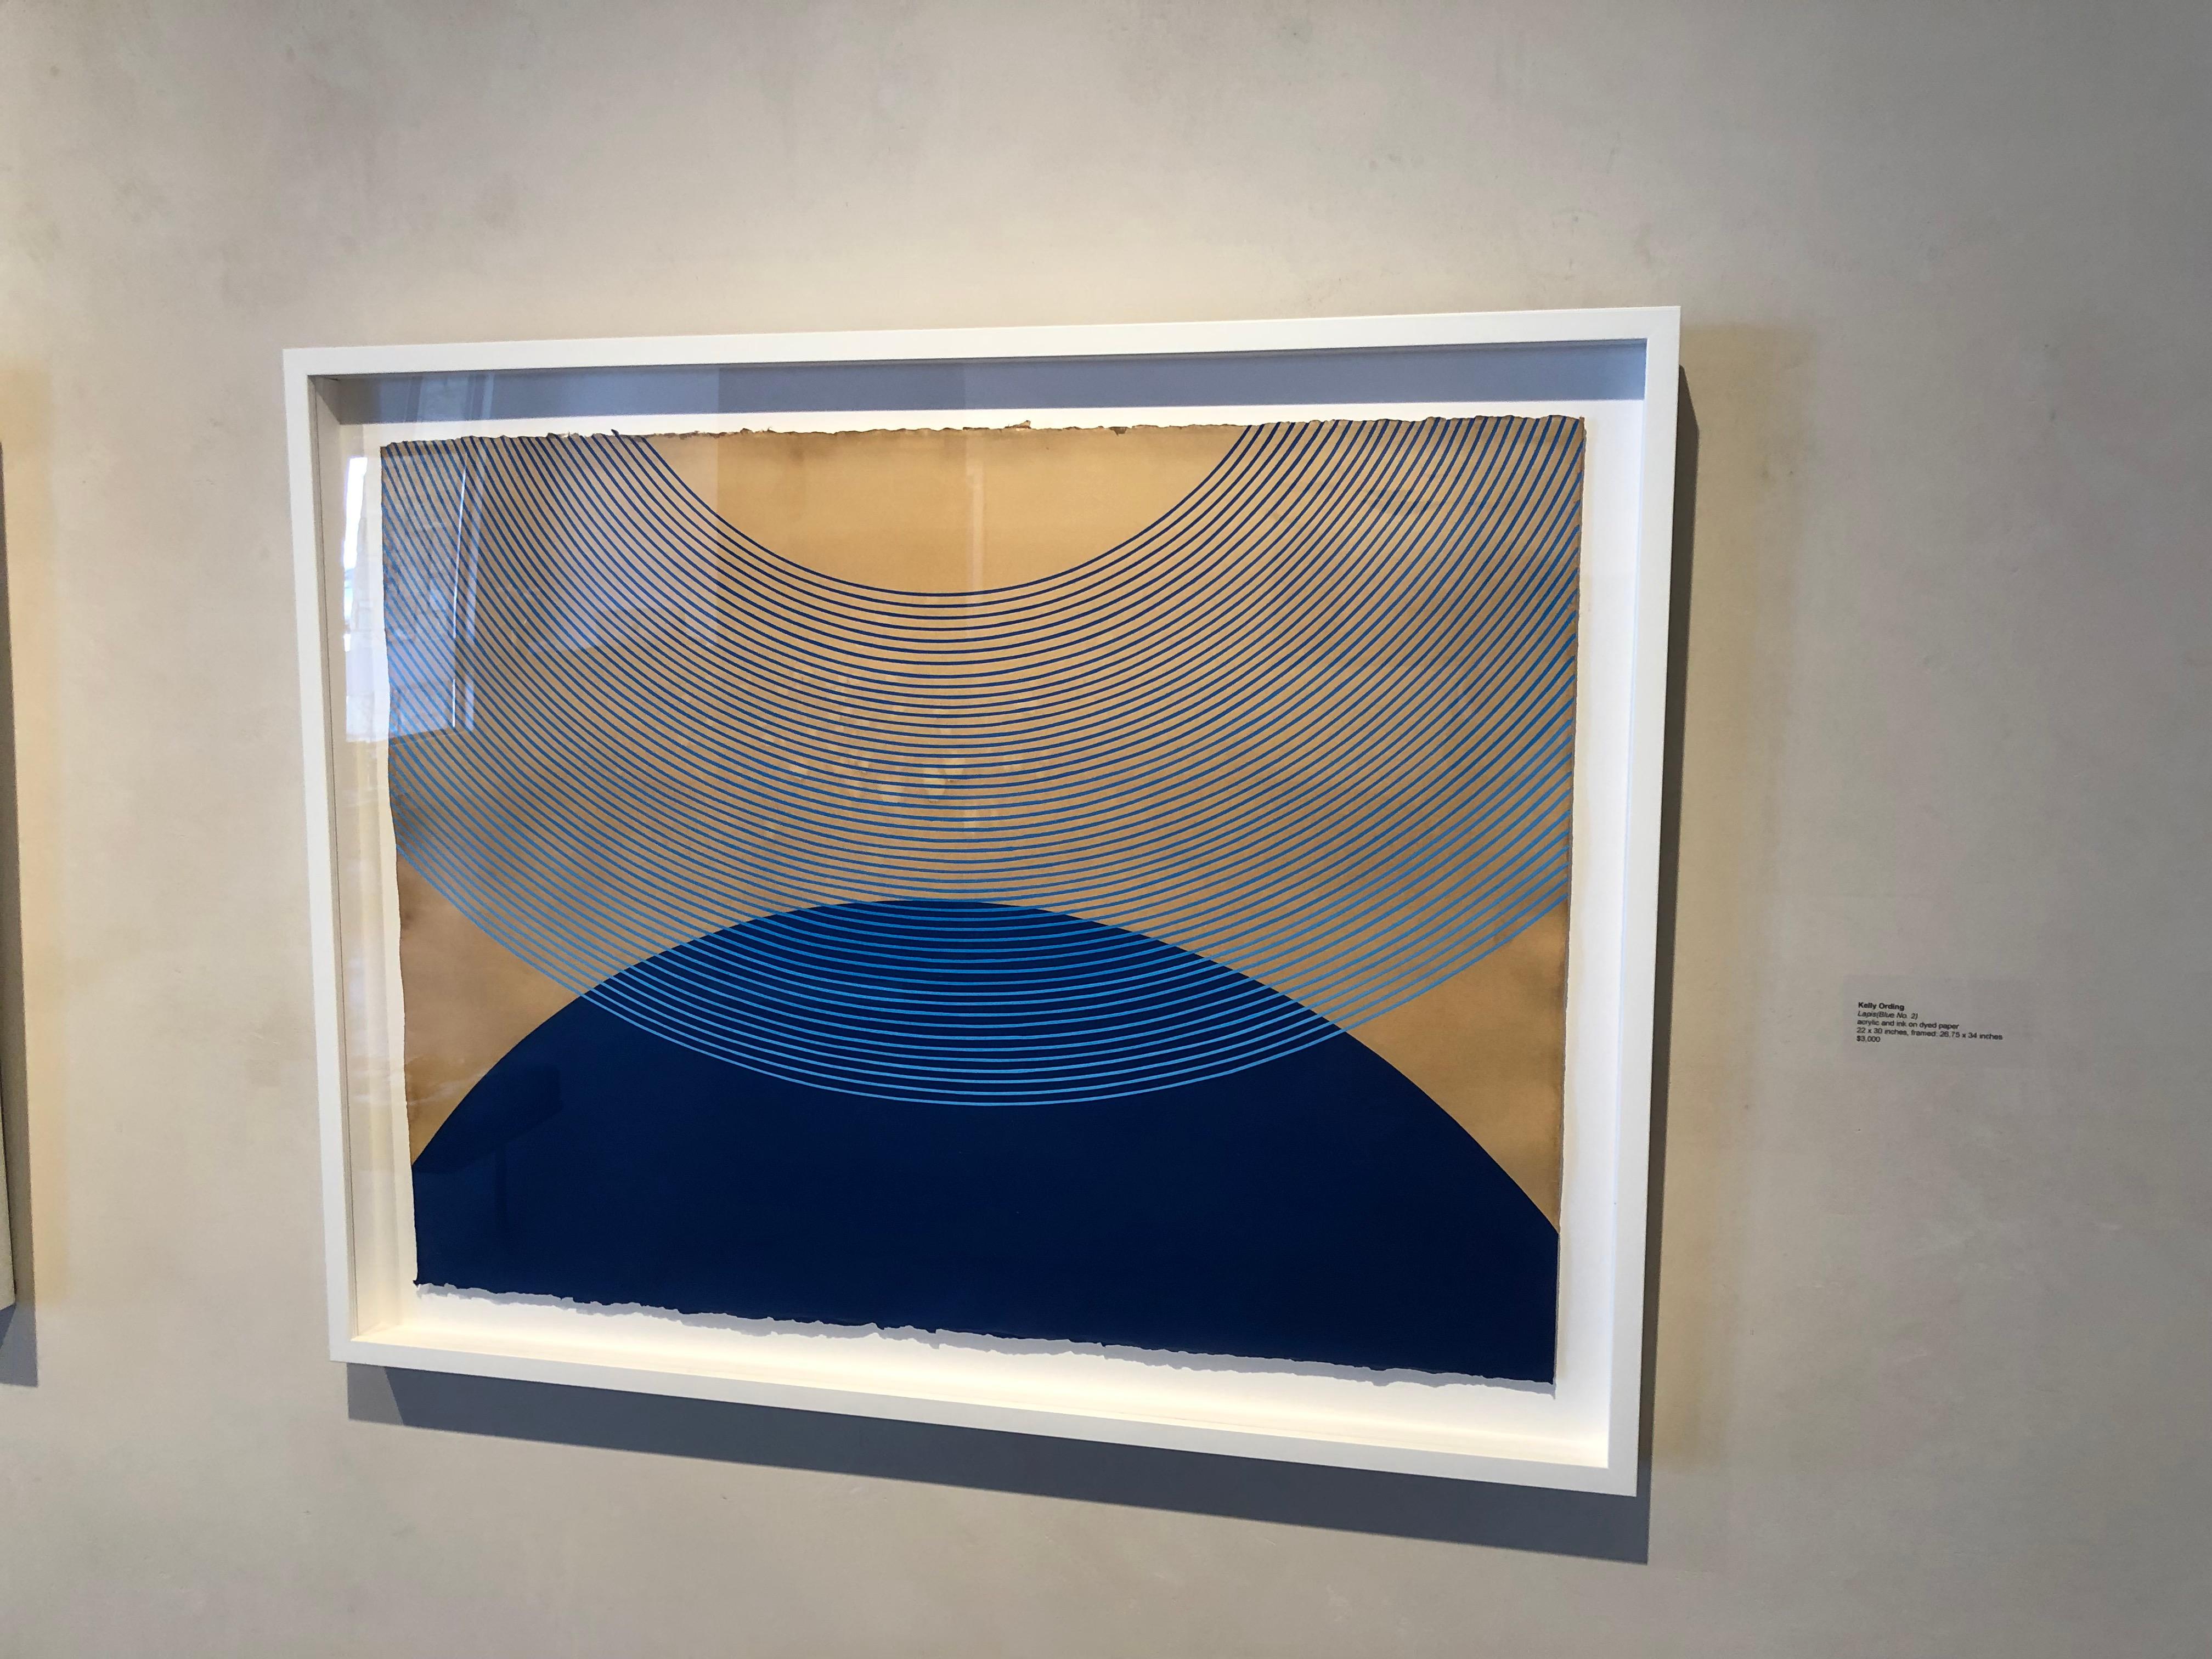 Lapis (Blue no.2 )27 x 34 inches framed, precise lines, paper, arch, geometric) - Gray Abstract Painting by Kelly Ording